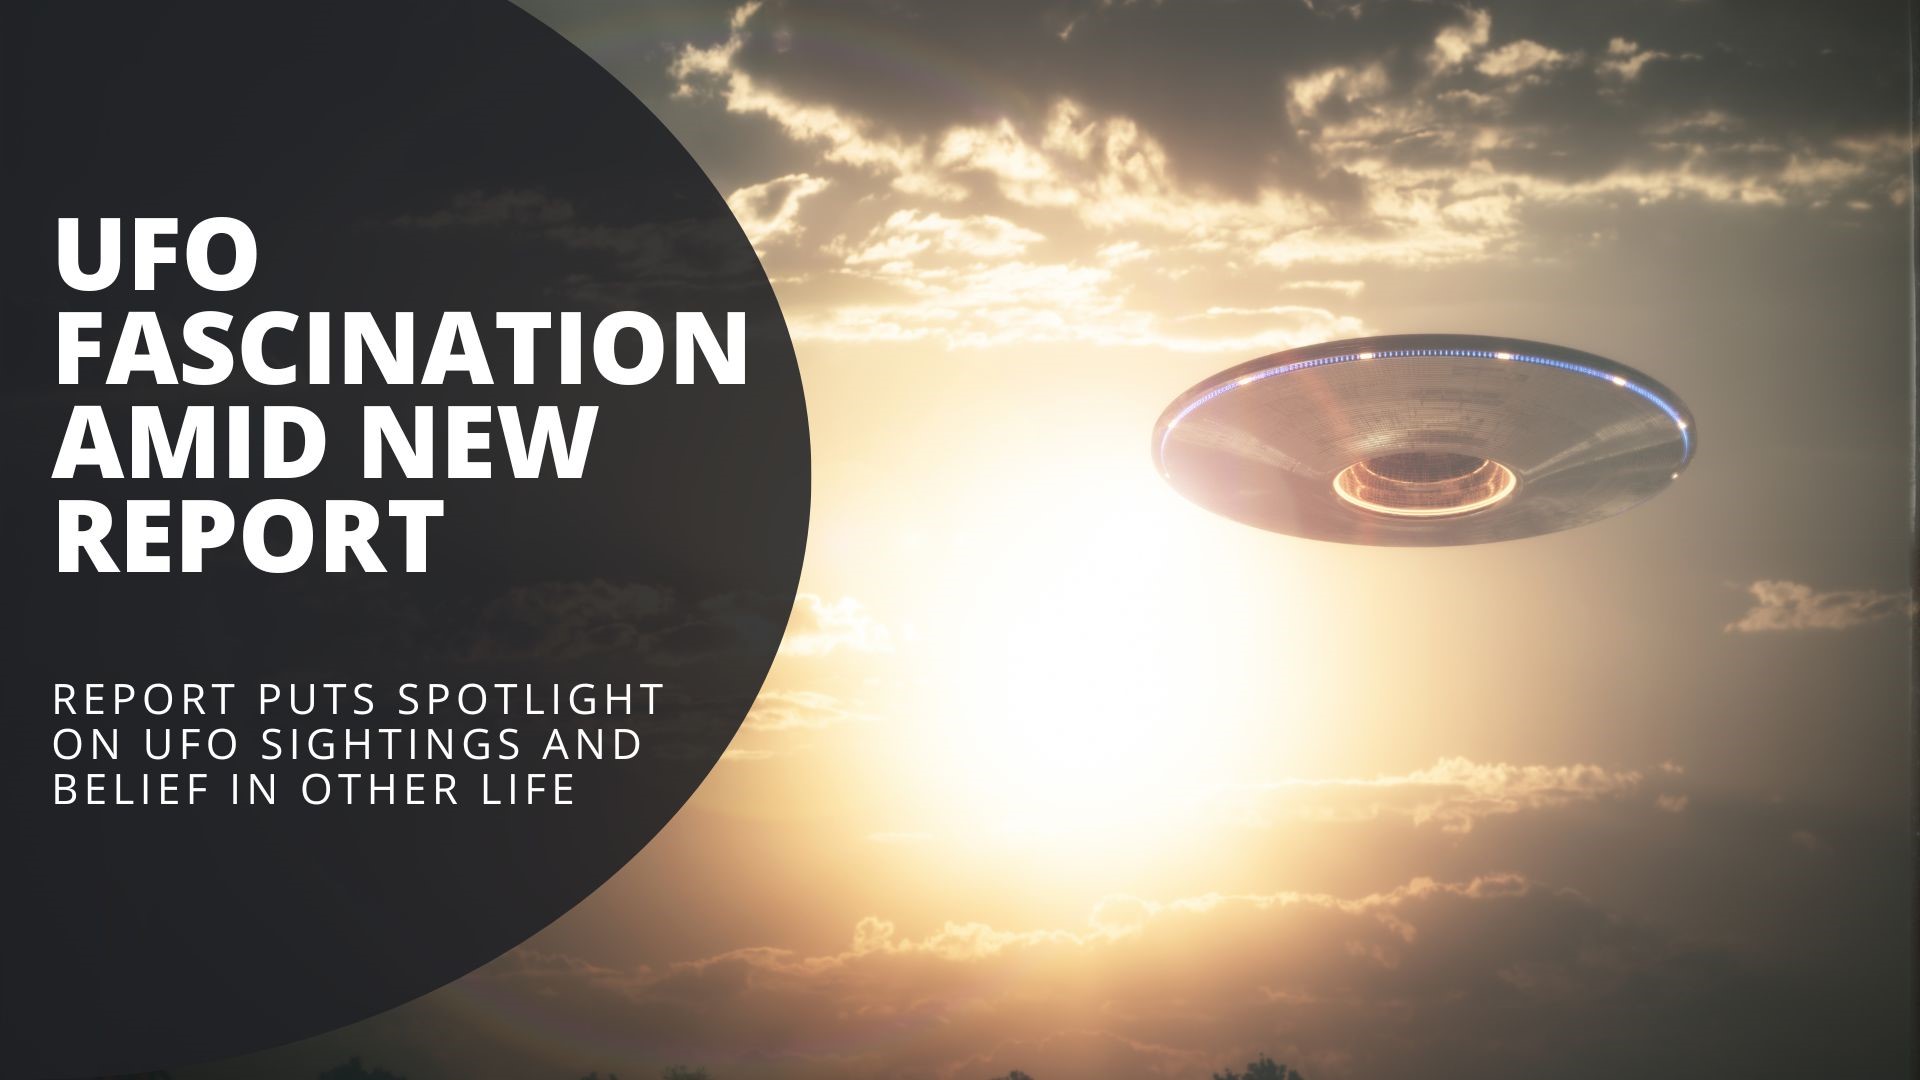 A special looking into a new report on UFO sightings. We take a deeper dive into what UFOs are and what this could mean for other forms of life.